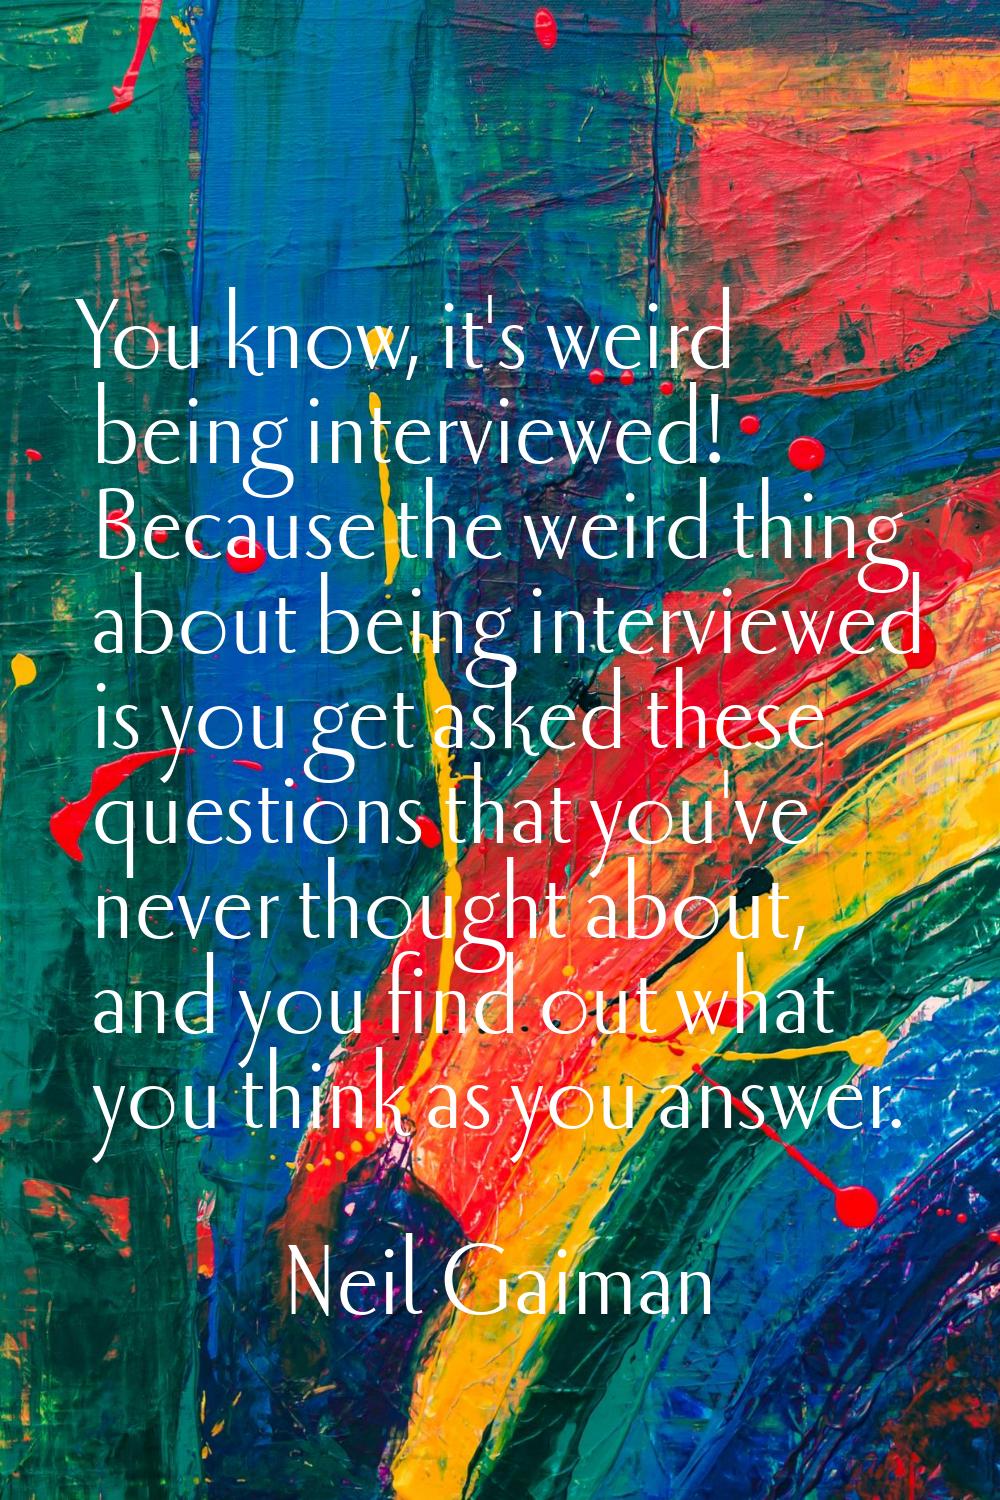 You know, it's weird being interviewed! Because the weird thing about being interviewed is you get 